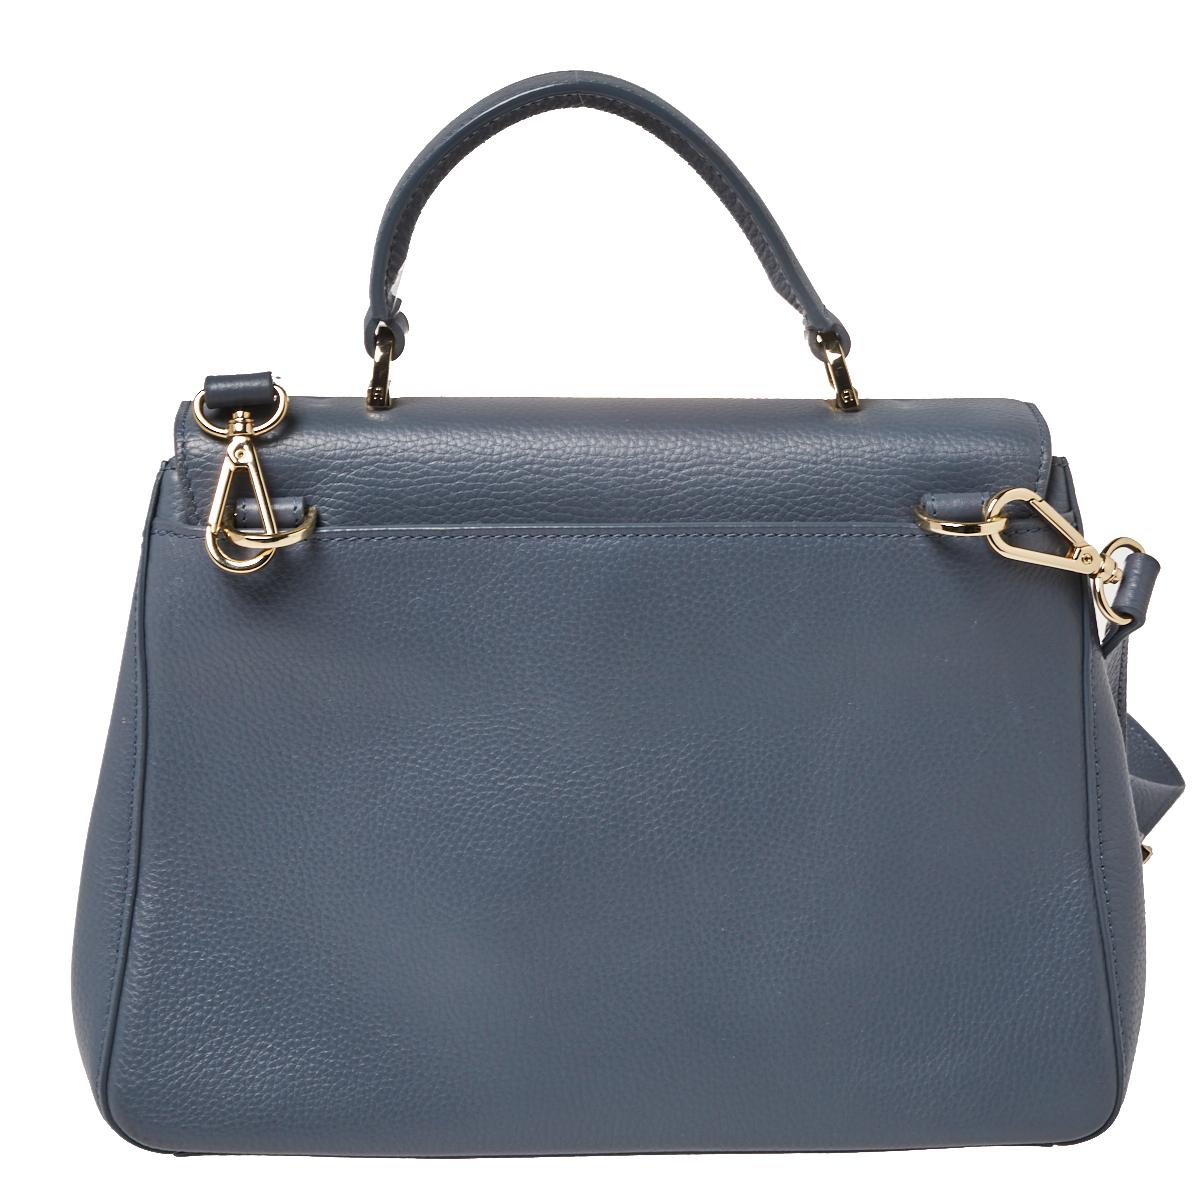 This Isabella bag from Aigner is crafted from grey leather and has a well-structured design. The bag comes with protective metal feet, a top handle, and a shoulder strap. The front flap opens to a fabric-lined interior capacious enough to carry your